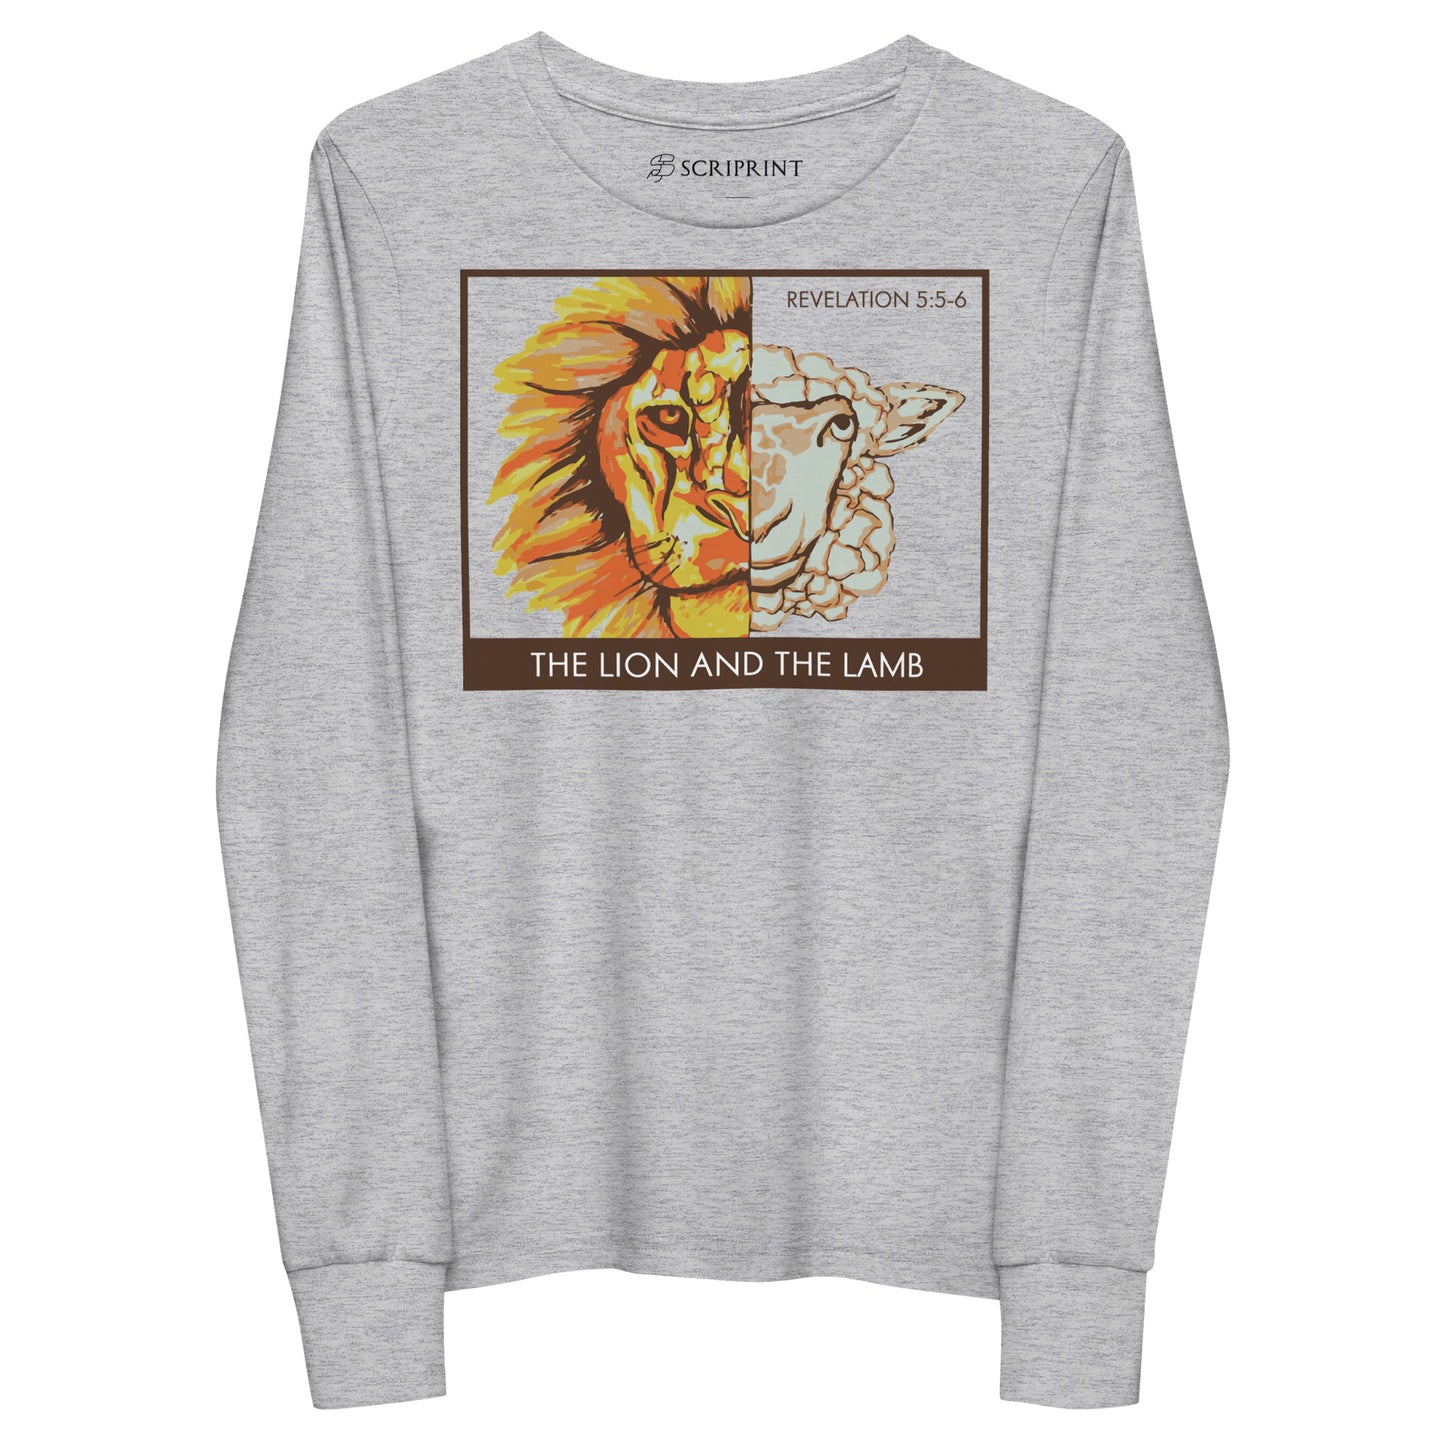 The Lion and the Lamb Youth Long Sleeve Tee